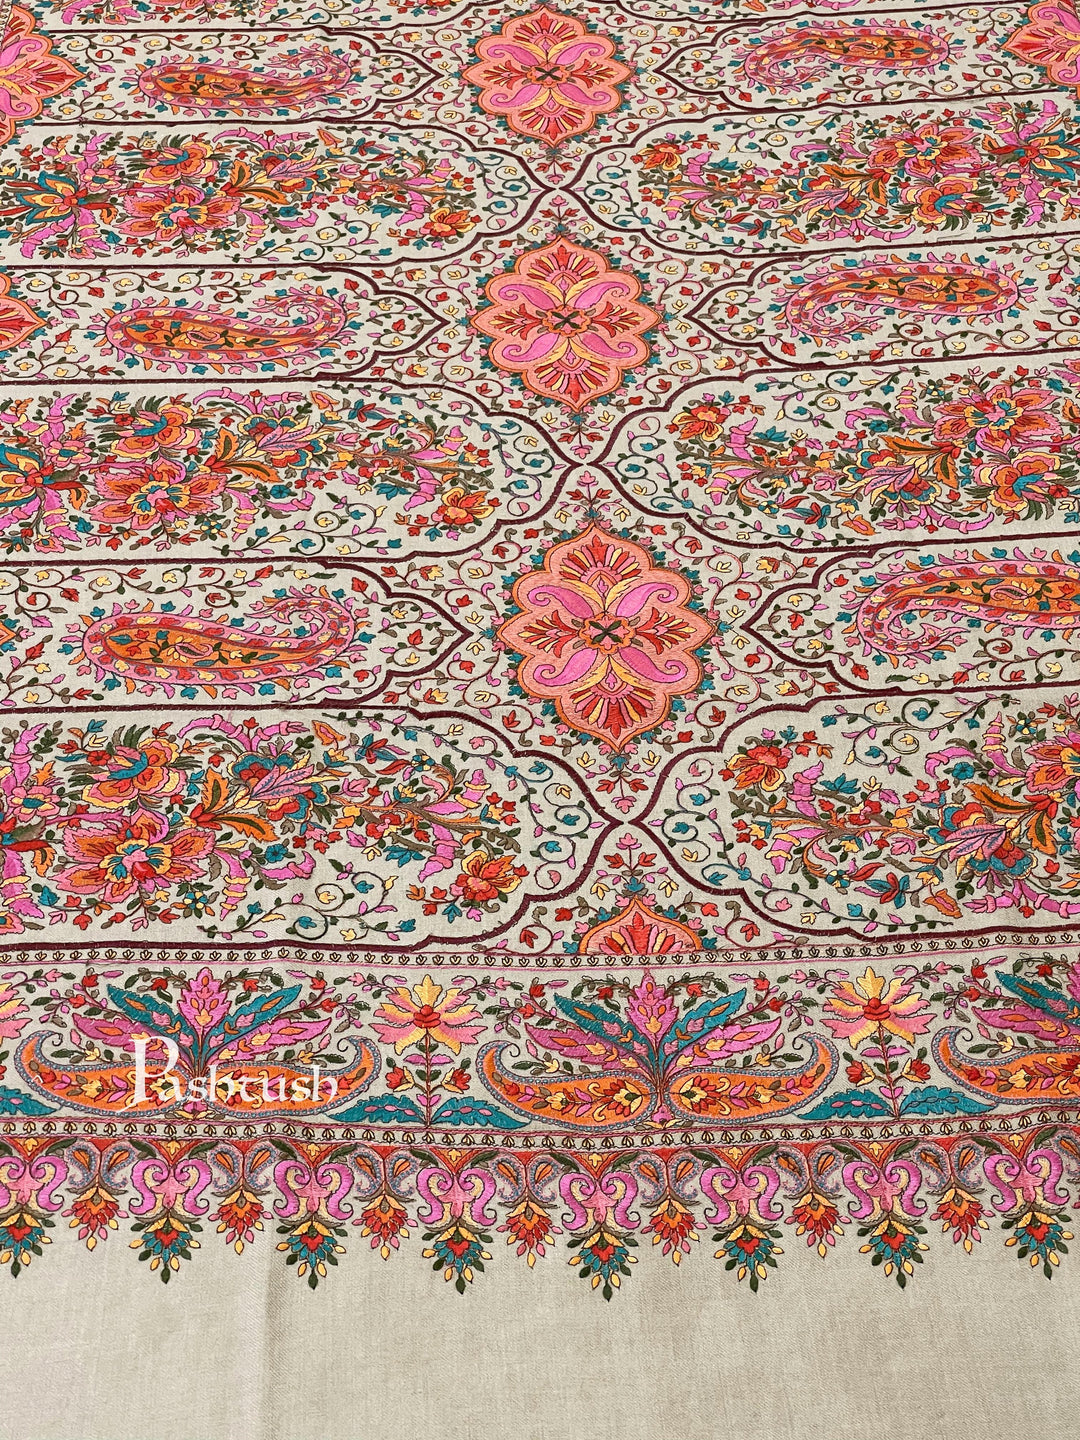 Pashtush Womens Papier-MâChé Embroidered Shawl, Fine Wool With Silky Embroidery.